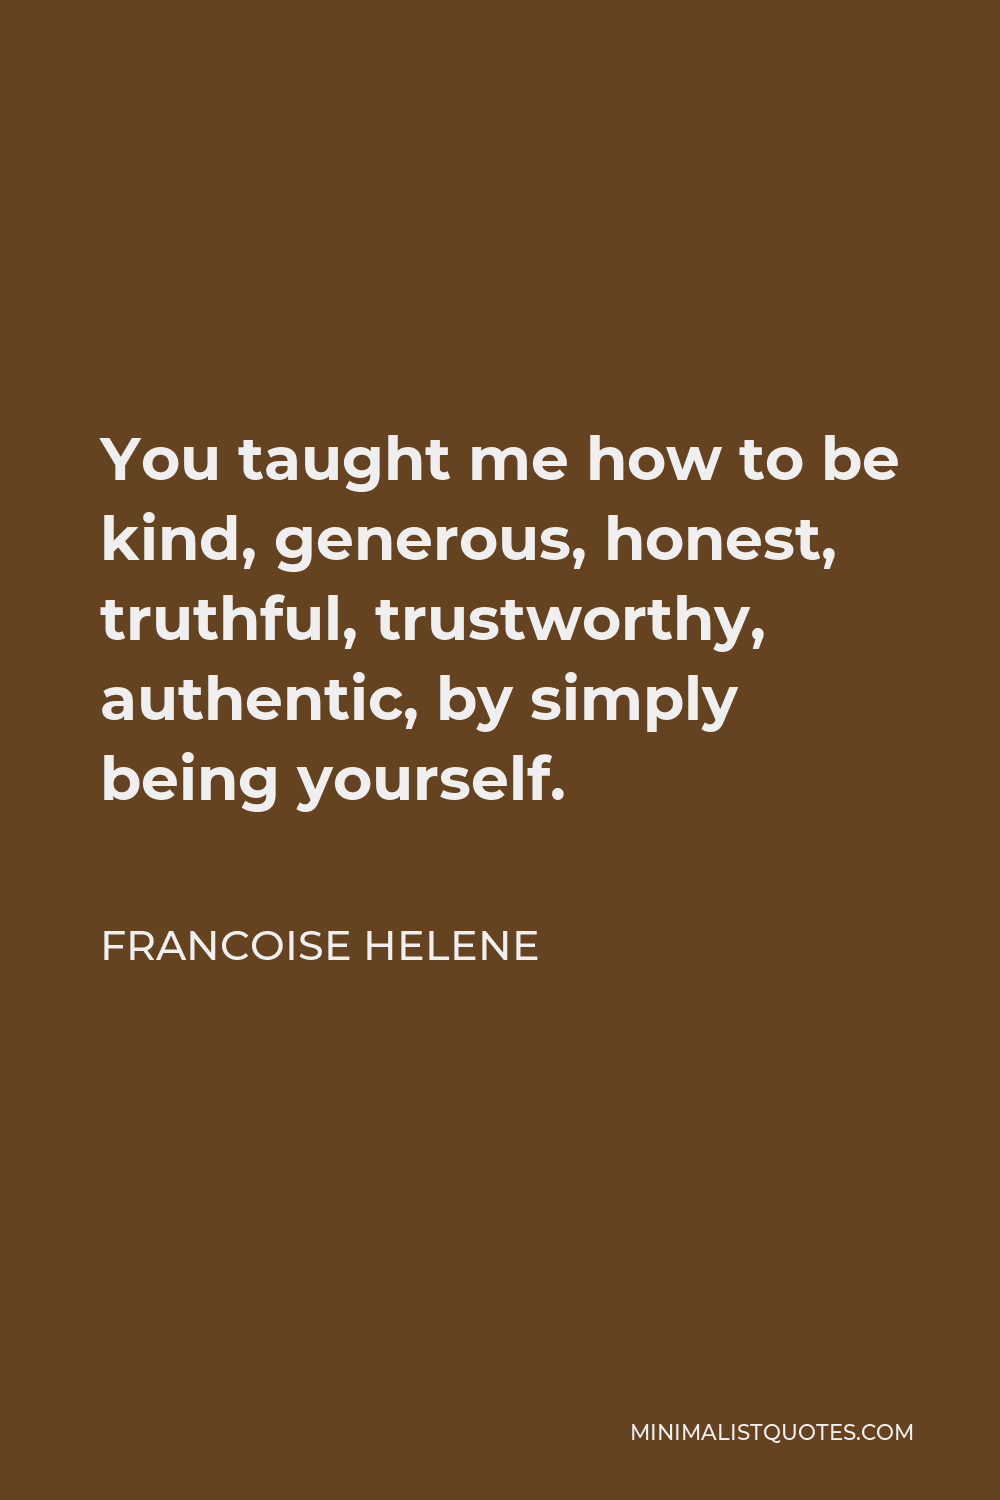 Francoise Helene Quote - You taught me how to be kind, generous, honest, truthful, trustworthy, authentic, by simply being yourself.